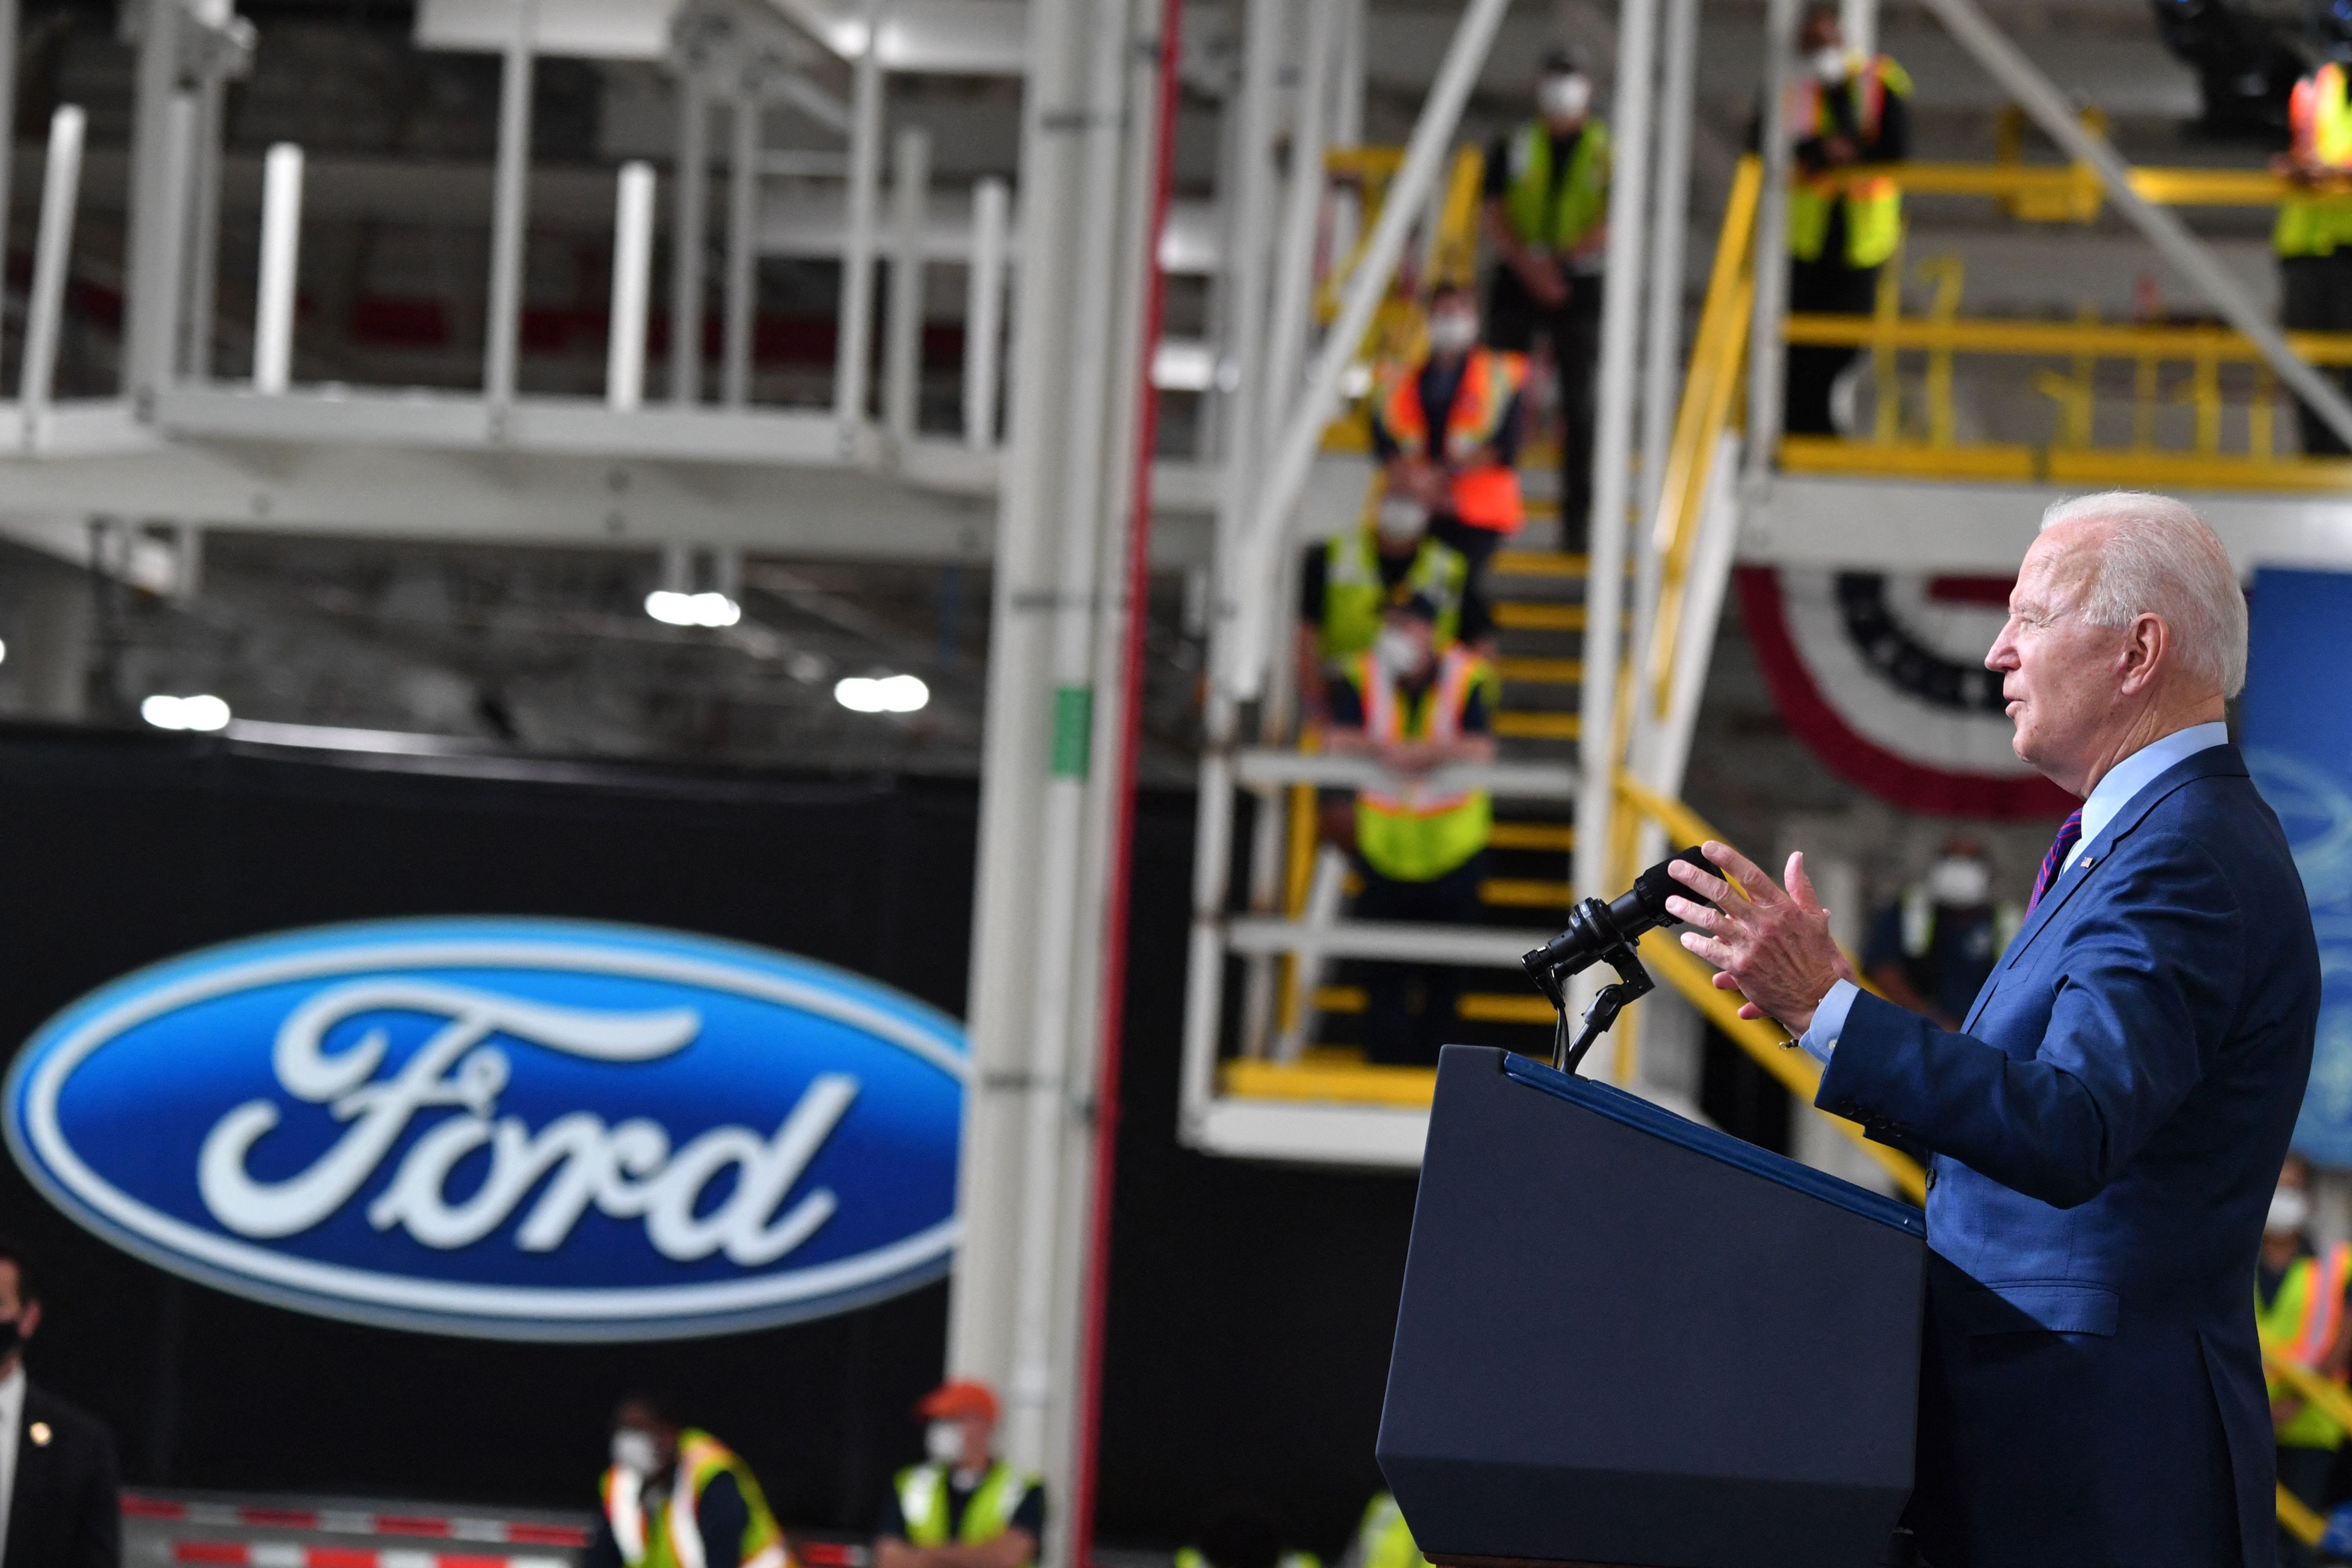 US President Joe Biden delivers remarks at the Ford Rouge Electric Vehicle Center, in Dearborn, Michigan.